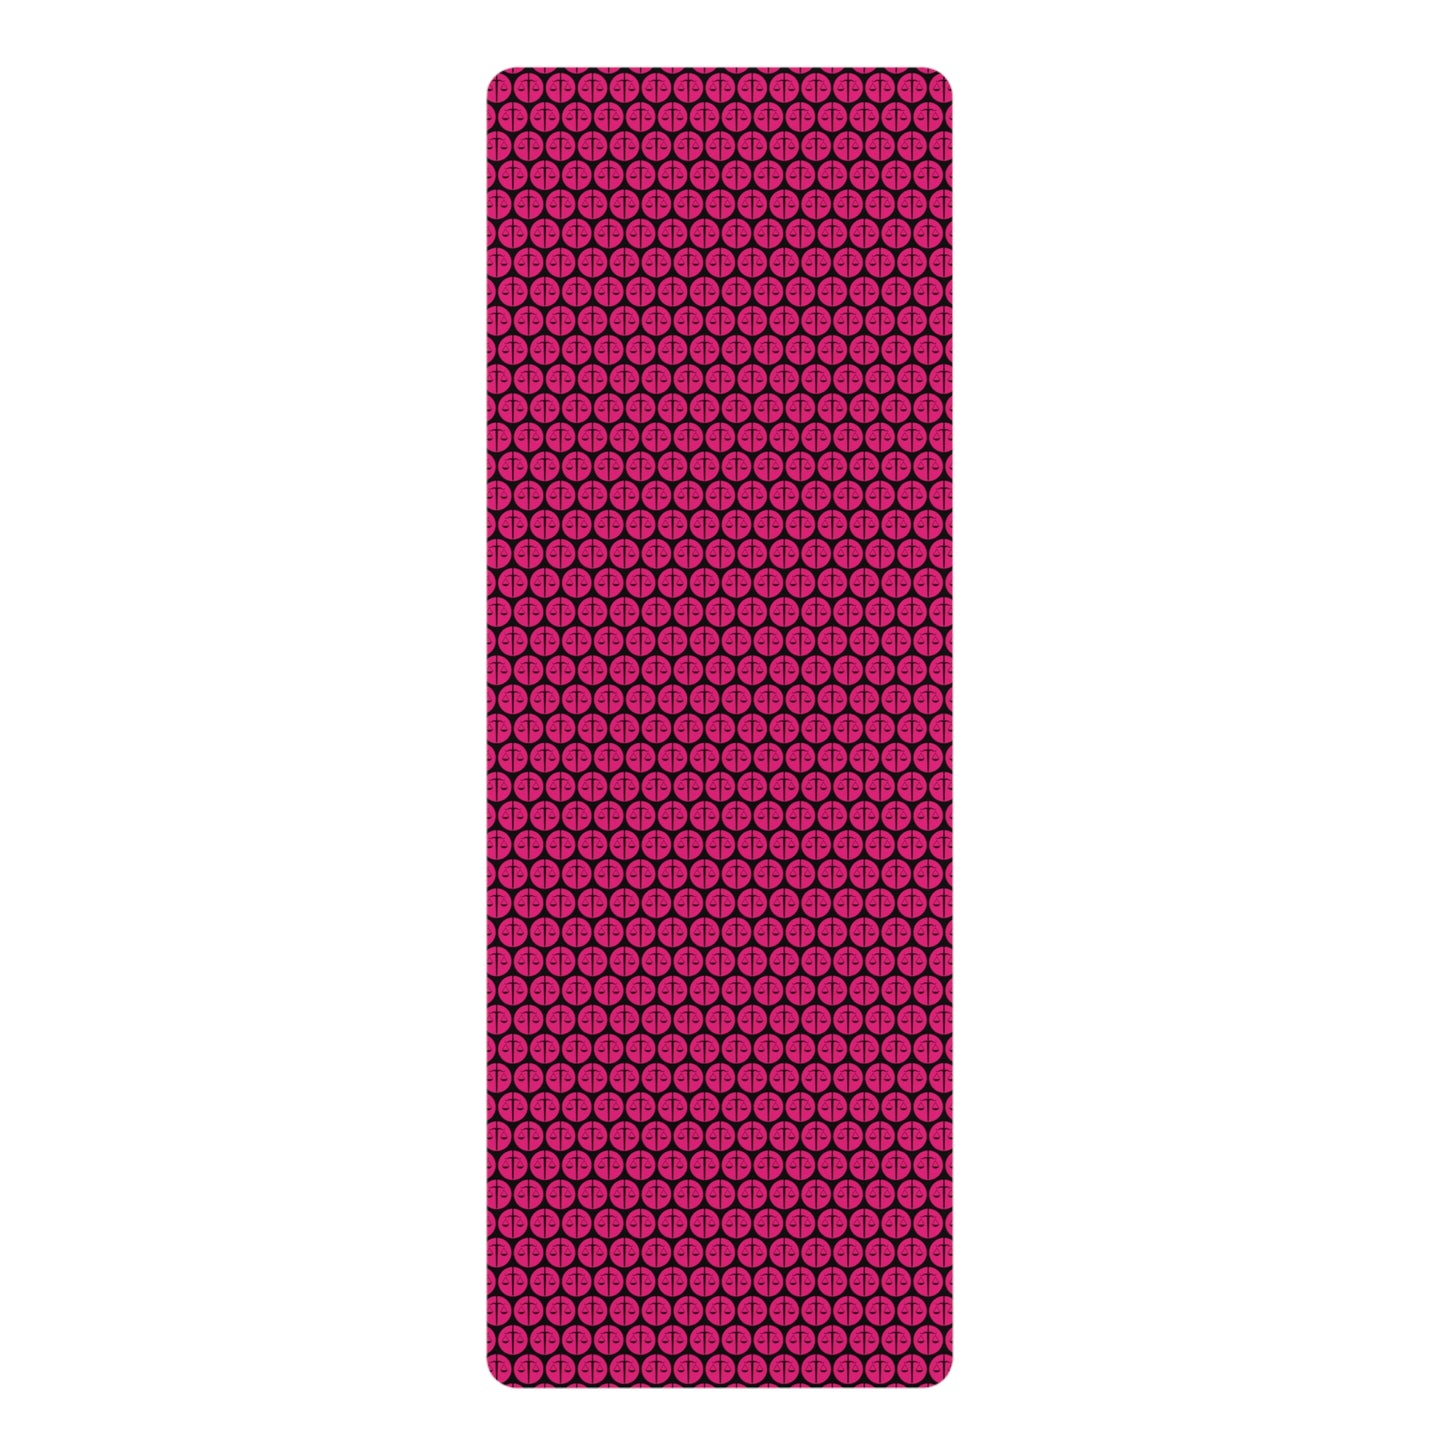 Sword and Scale Rubber Yoga Mat